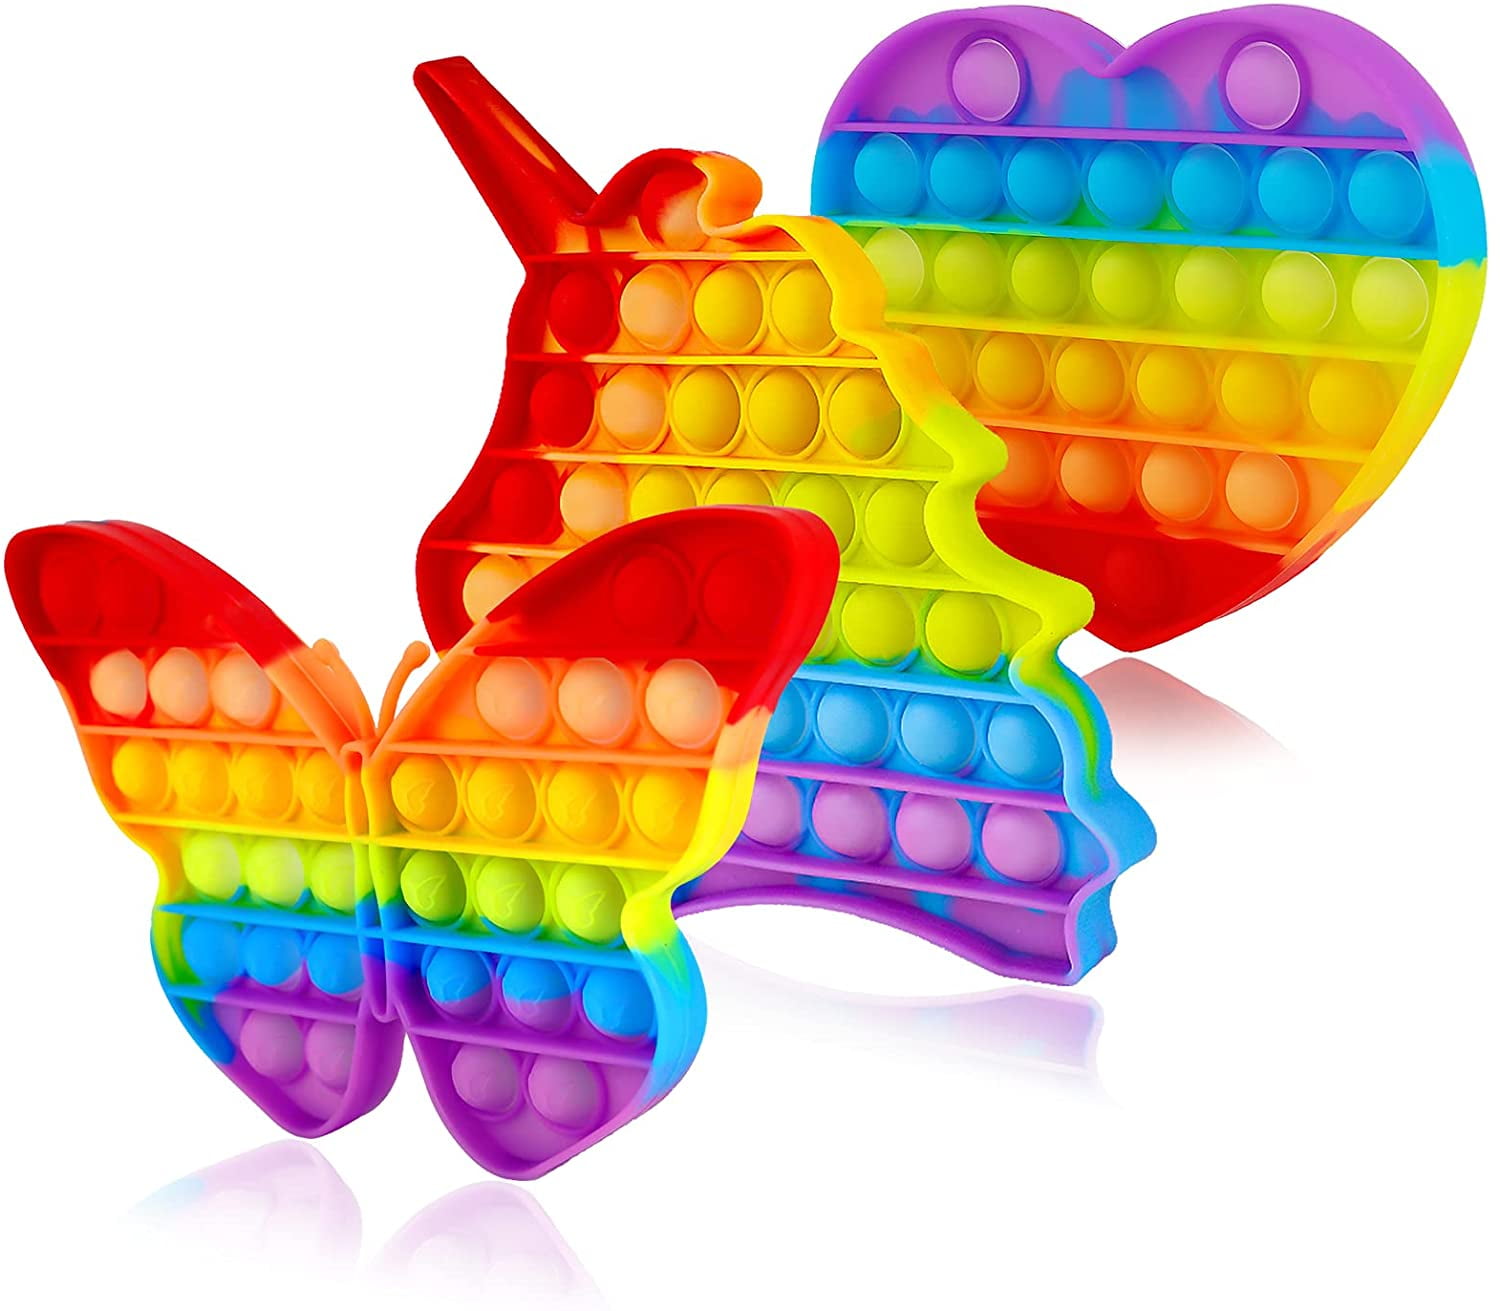 Details about   Figit Fidget Toy Sensory Buddle Rainbow Popit Silicone Anxiety Stress Relief Toy 